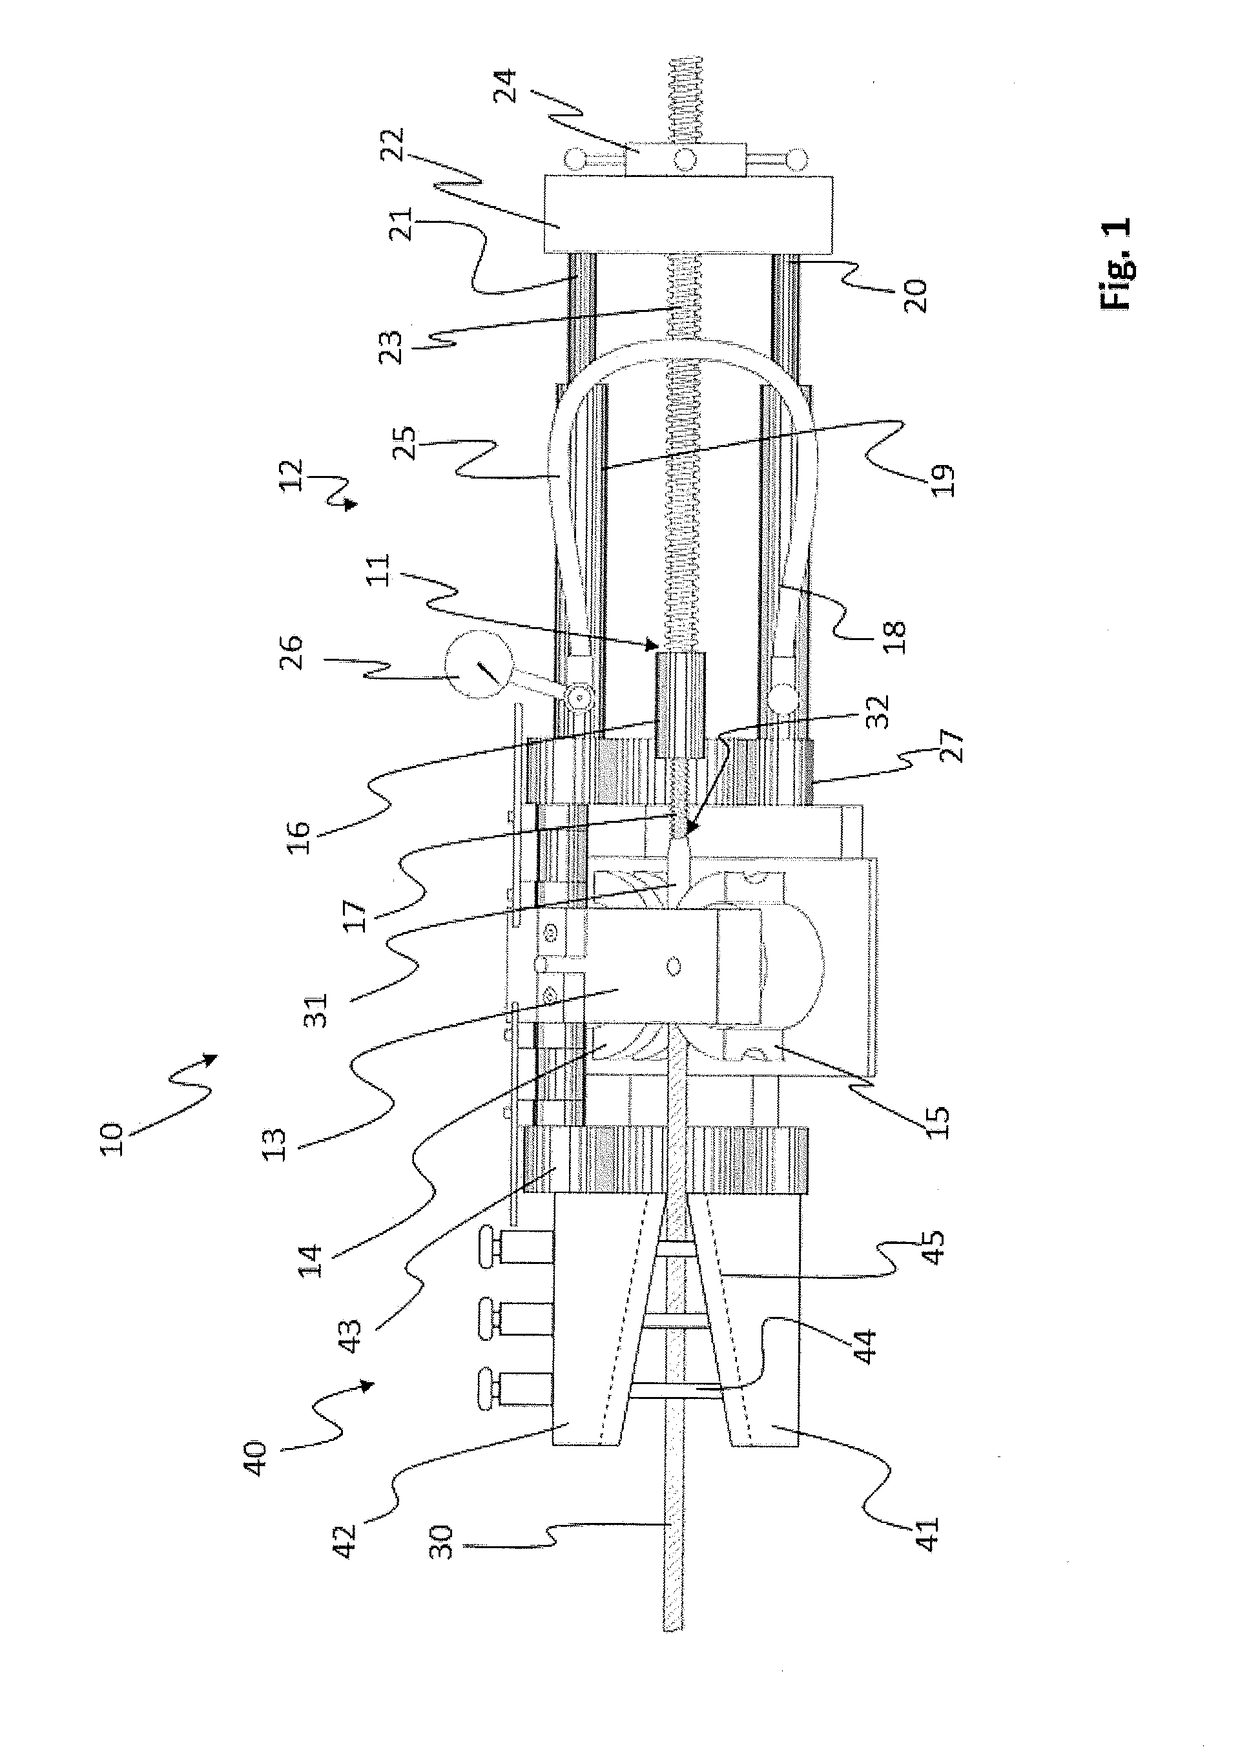 Apparatus and method for attaching a sleeve to a wire end